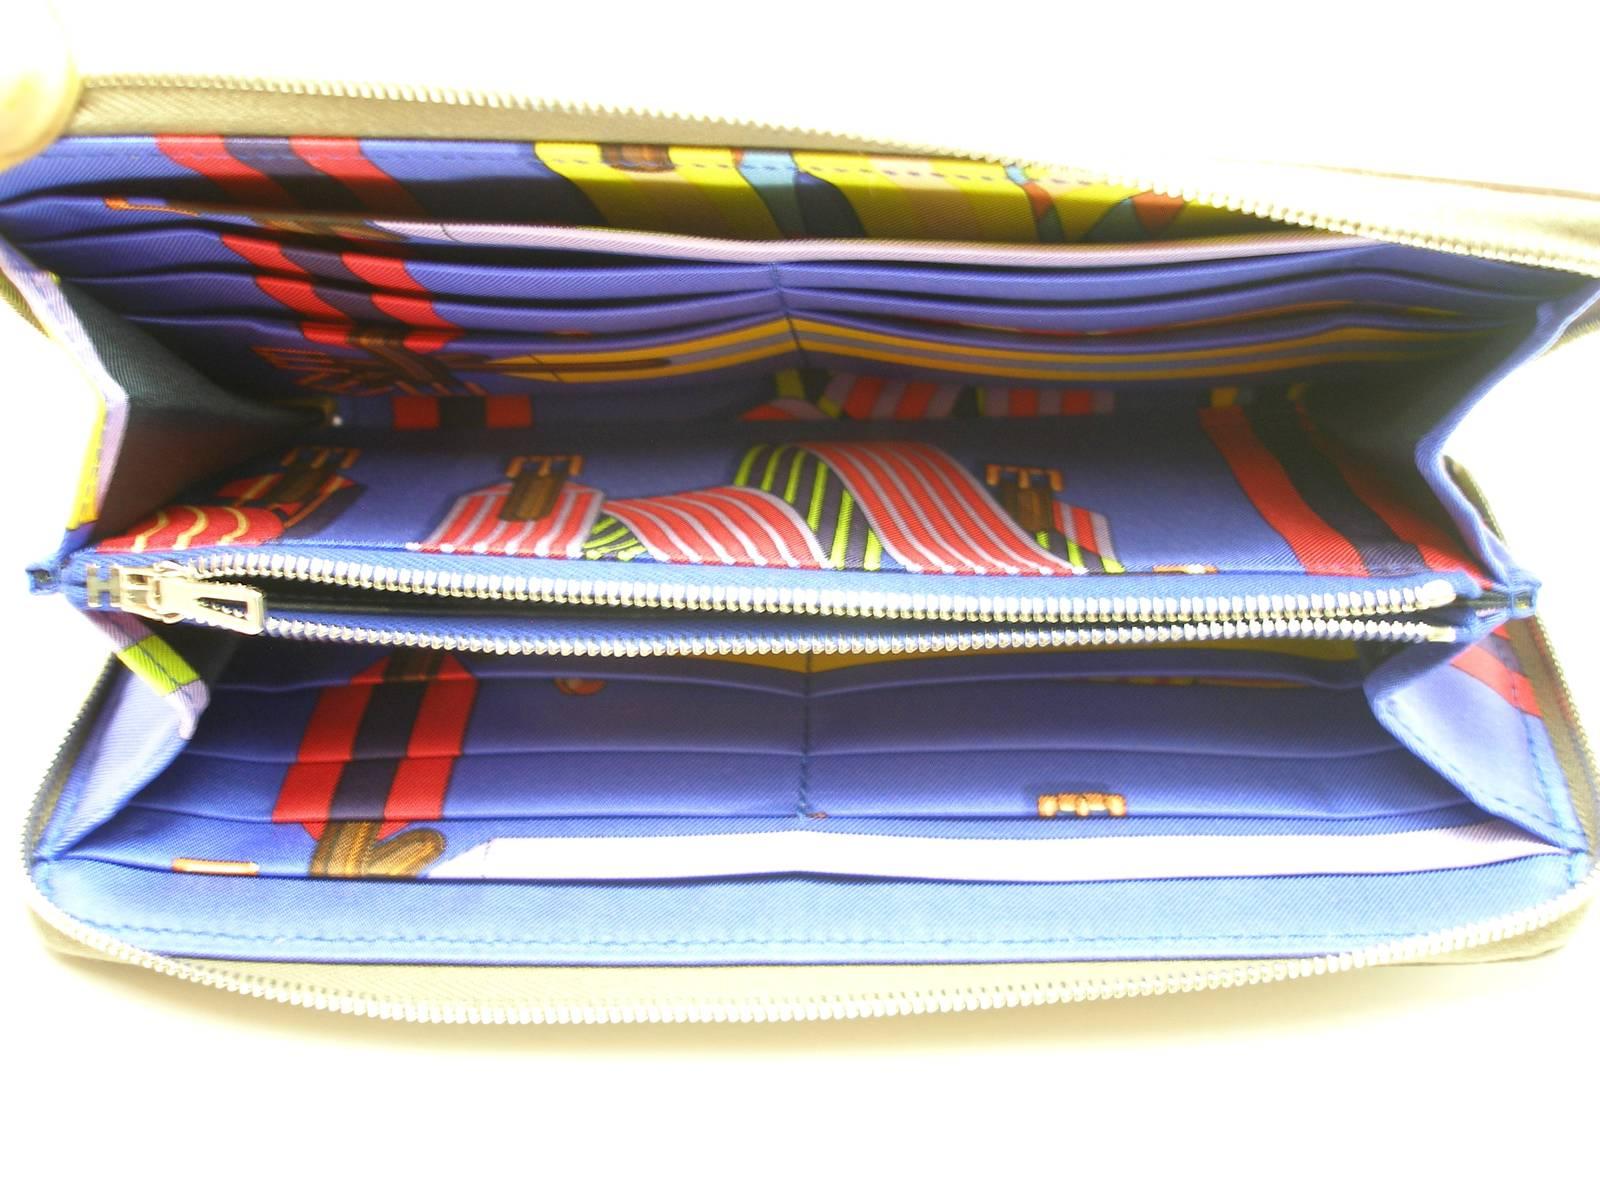 Silk'In classic wallet Large Size Etoupe Leather and Sangles bleu Electrique NEW 5